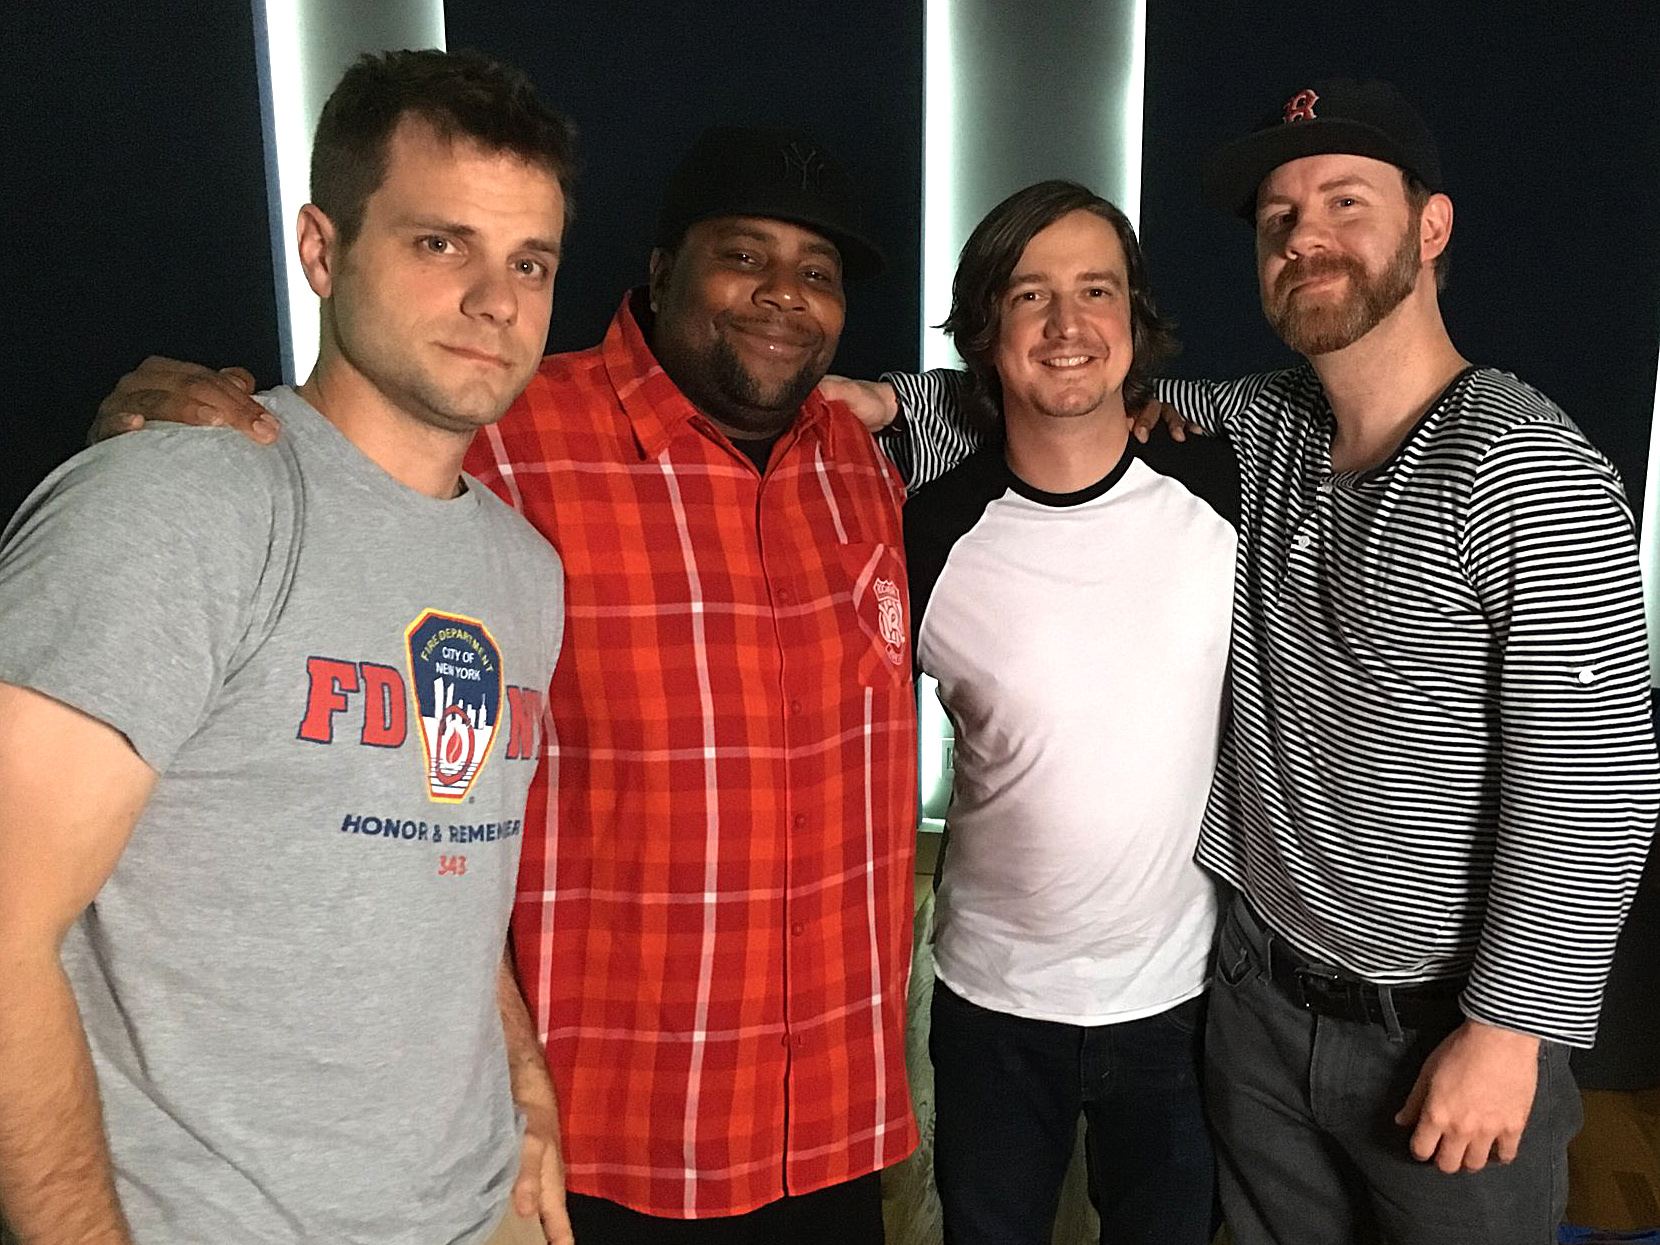 Producer Shawn Cauthen and directors Scott Barber and Adam Sweeney with current SNL cast member, and former Nick star, Kenan Thompson. (Photo: Gravitas Ventures)